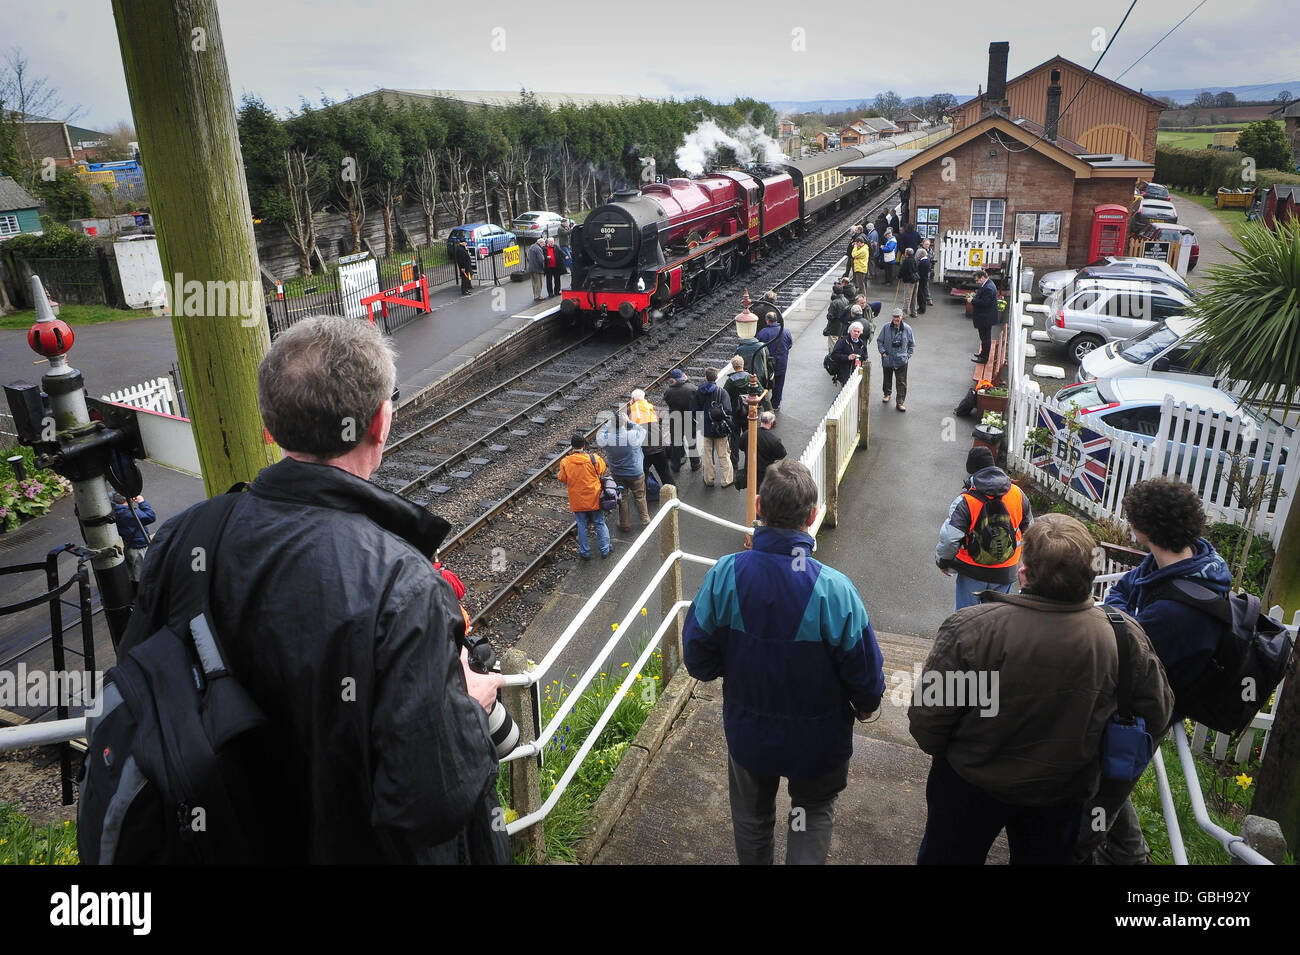 Railway enthusiasts gather to take pictures and gaze at the recently restored LMS 6100 Royal Scot steam engine at Bishop's Lydeard train station on its first day of four days taking part in the West Somerset Railway's Spring steam gala. Stock Photo